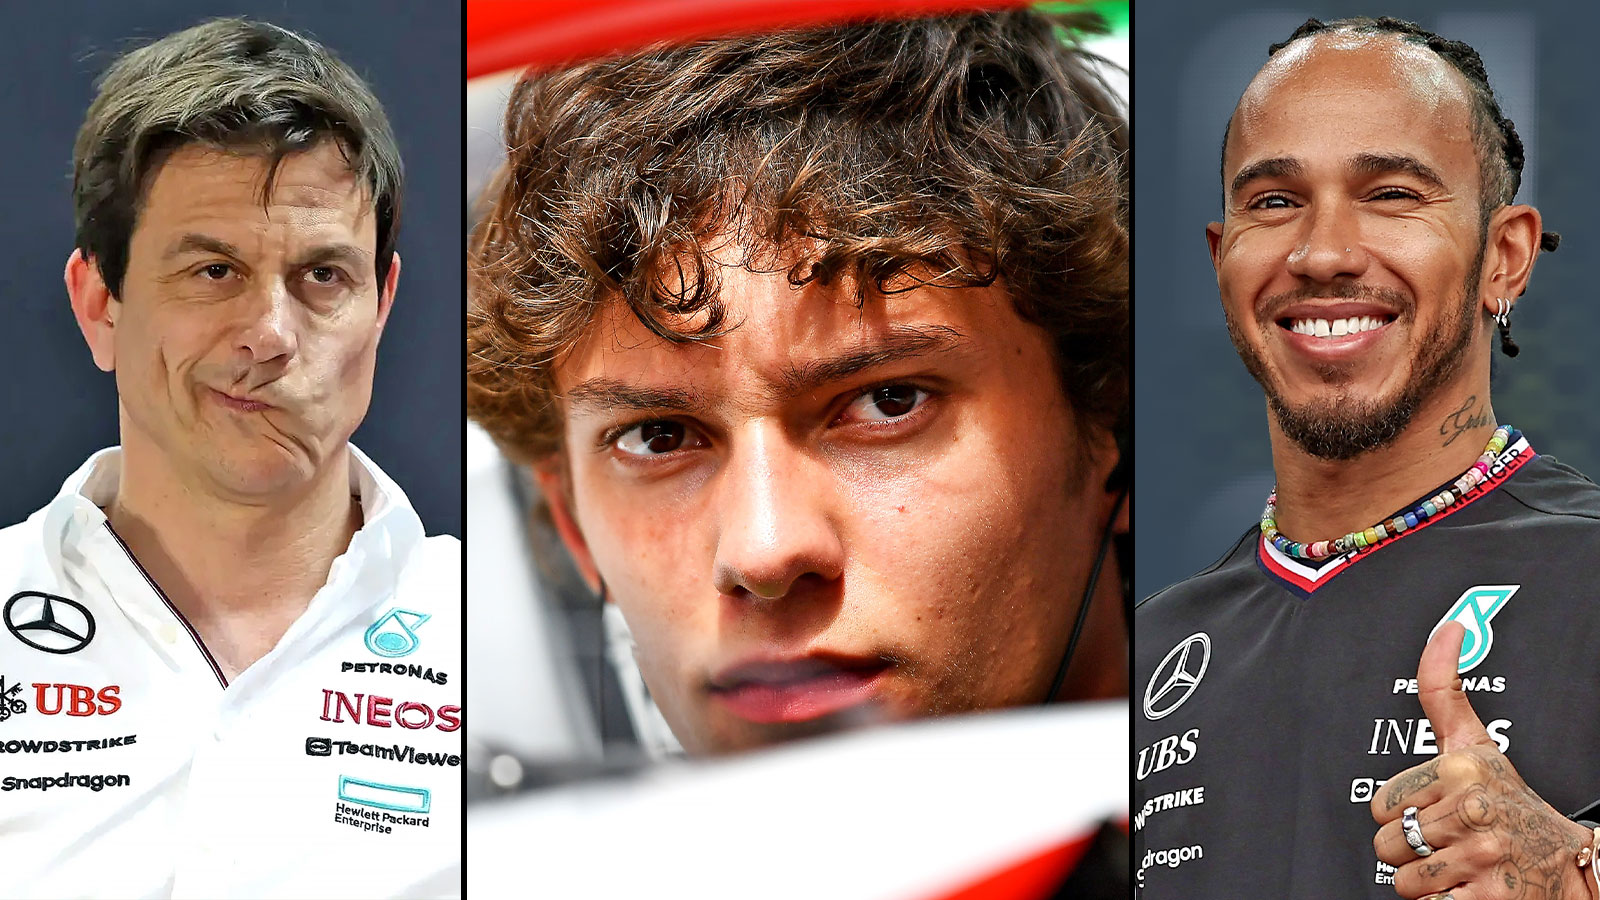 With Mercedes in limbo, Toto Wolff, the team principal, left, needs a short-term fix and Andrea Kimi Antonelli, centre, already has Lewis Hamilton’s seal of approval